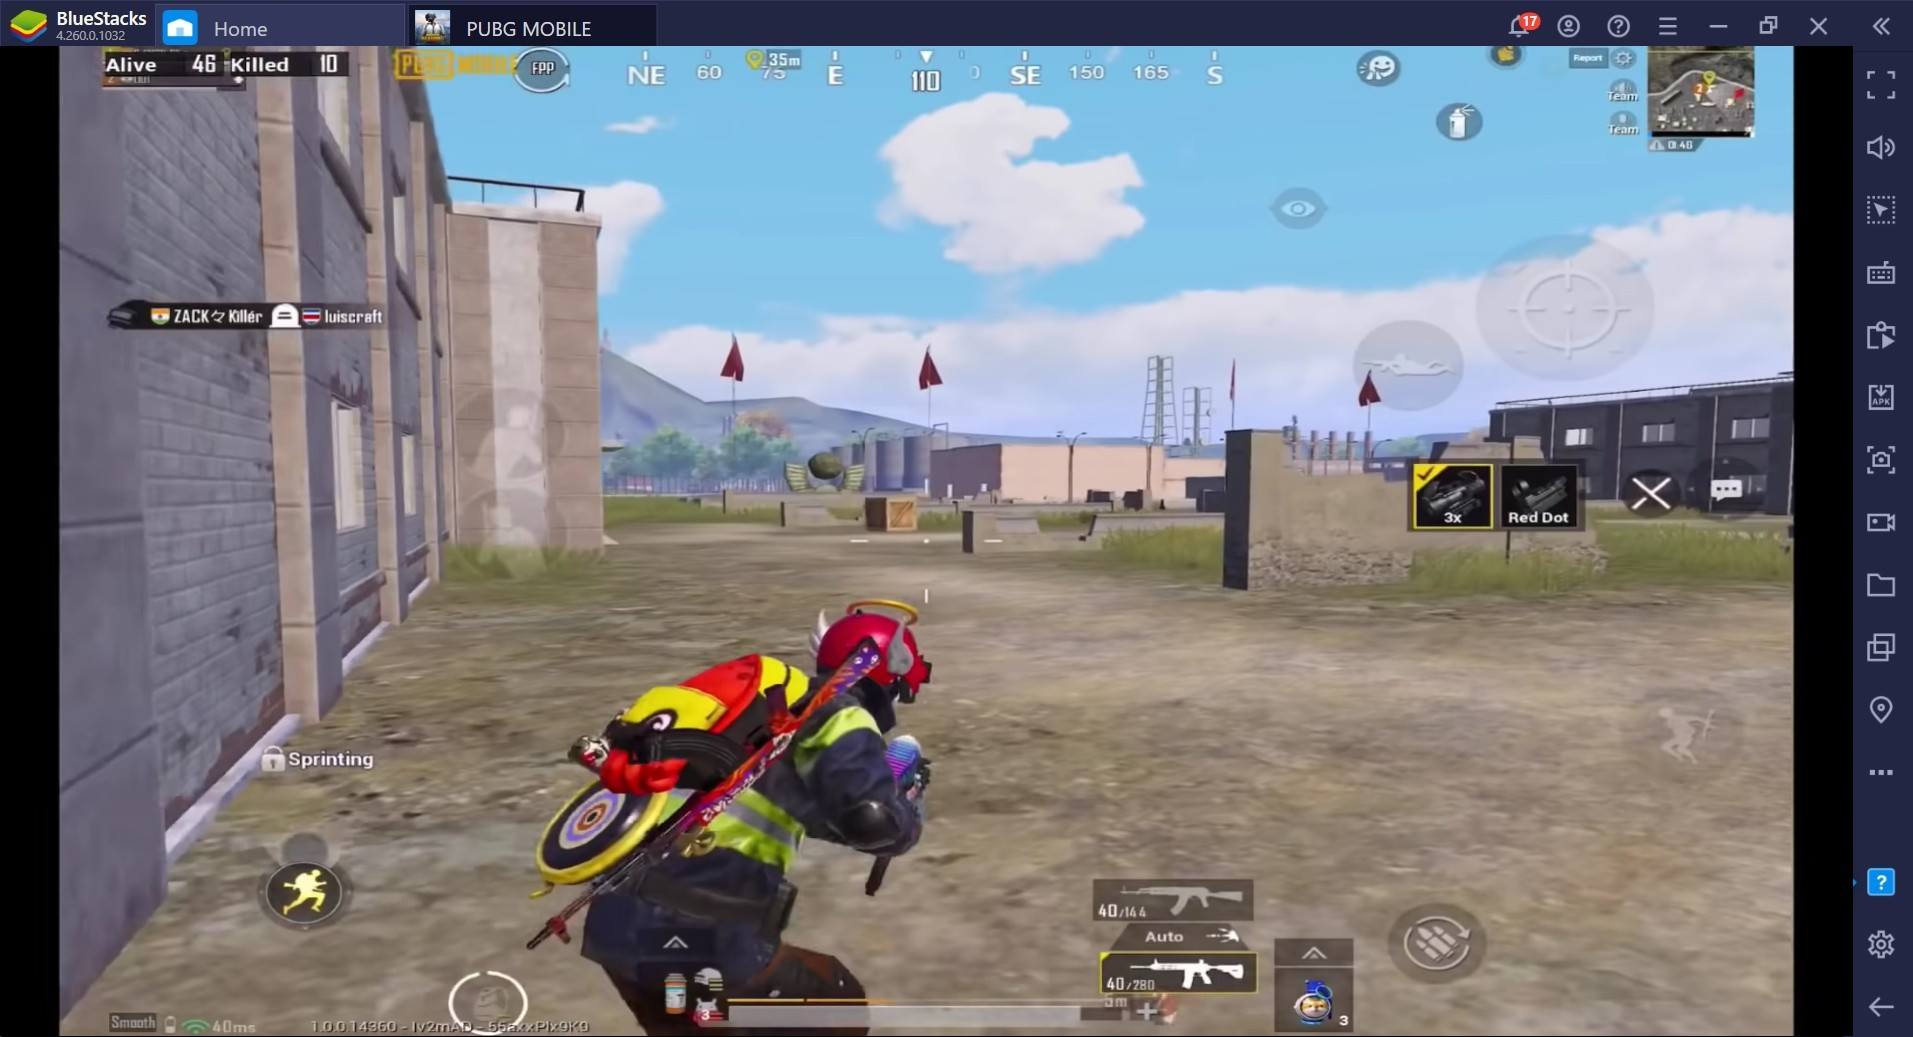 PUBG Mobile Map Guide for Bronze, Silver, and Gold Players